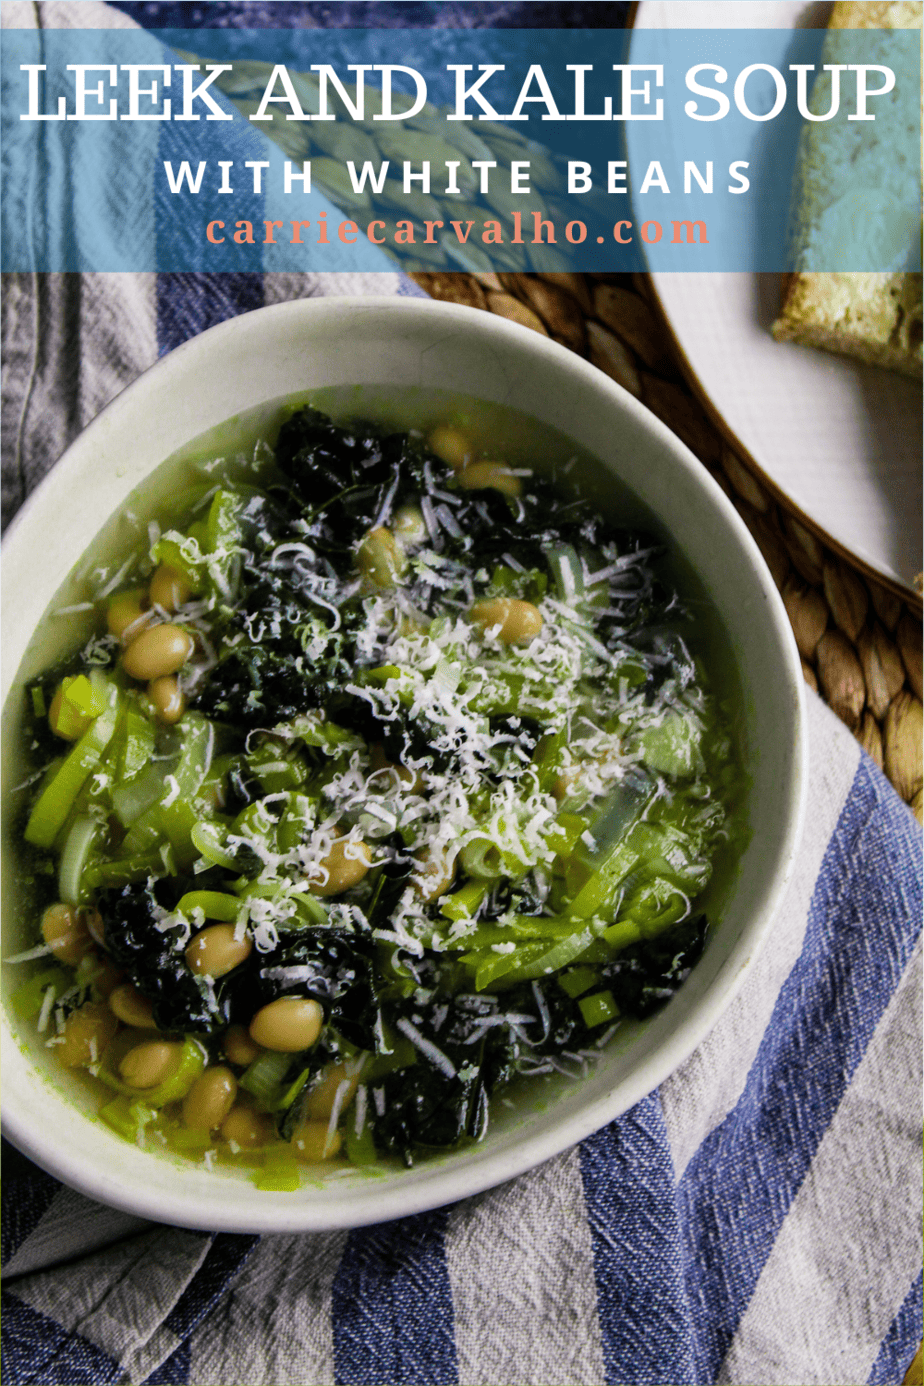 Leek and Kale Soup with White Beans